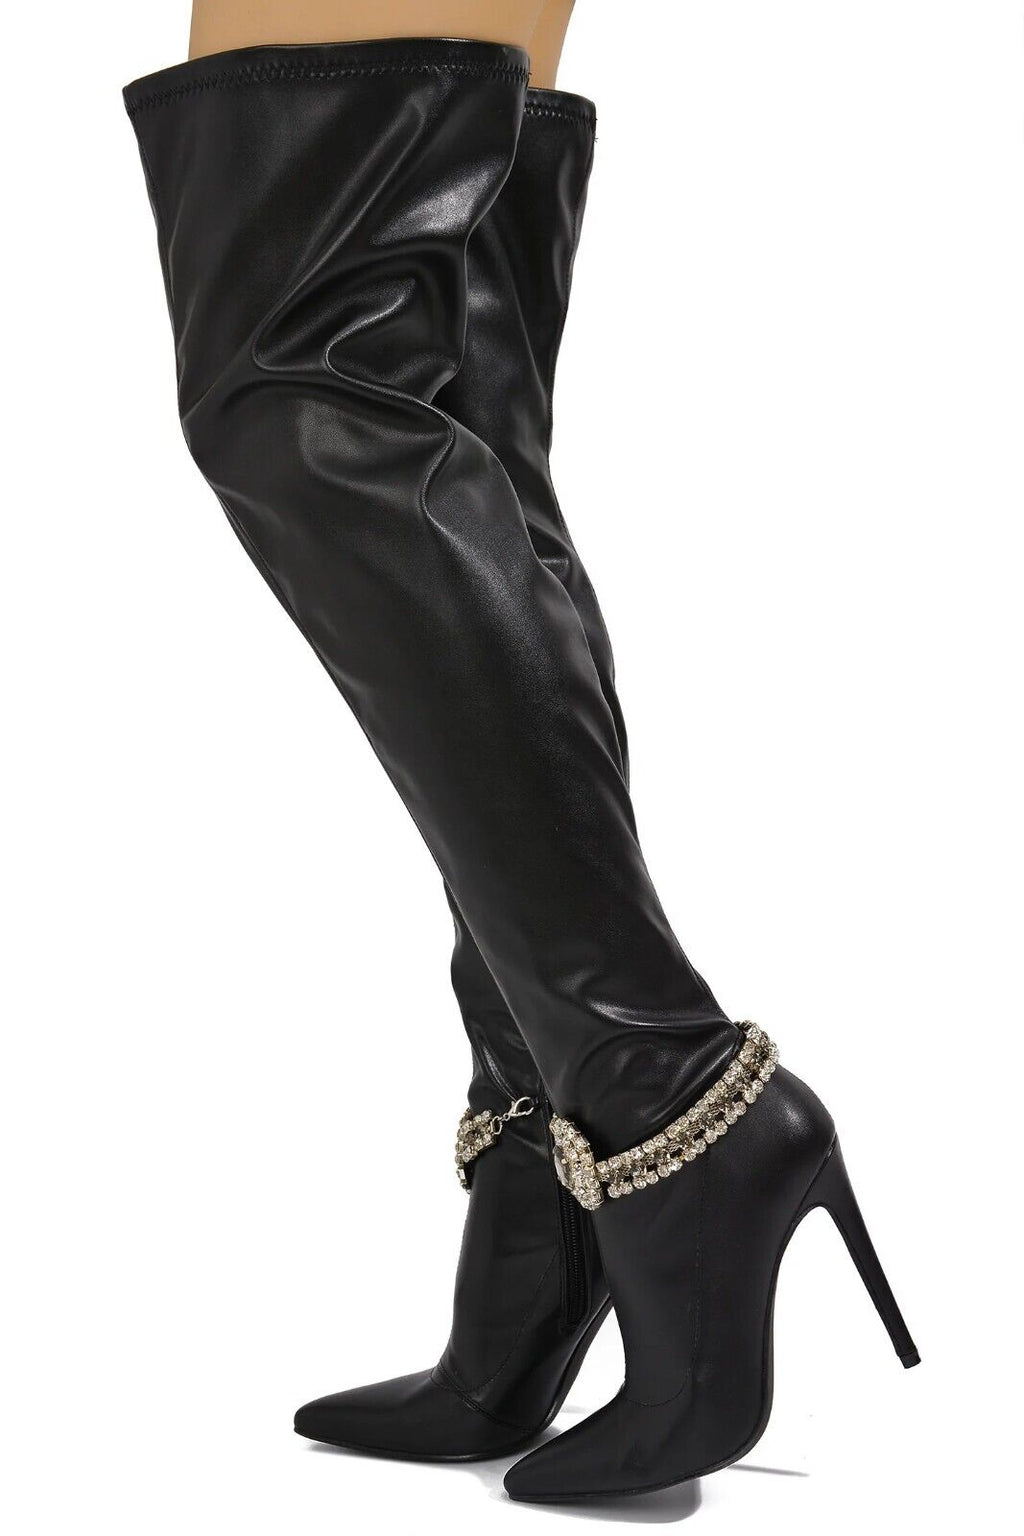 Lawless Black Stretch Leatherette Rhinestone Ankle Bracelet Thigh High Boots - Totally Wicked Footwear